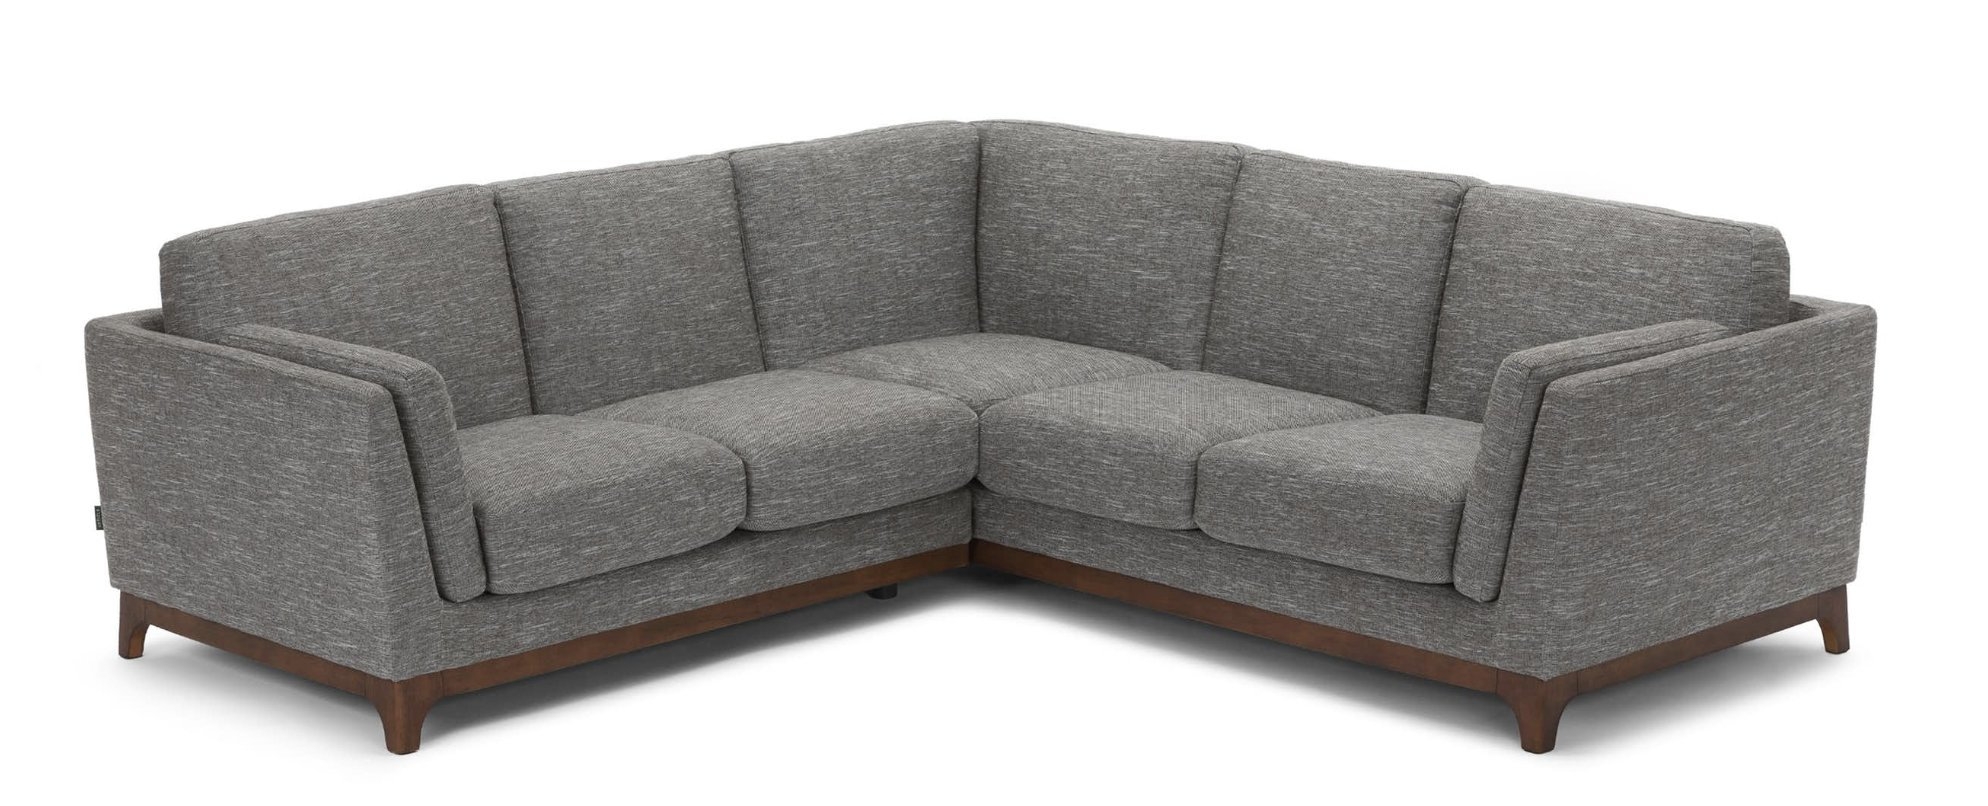 Ceni sectional - VOLCANIC GRAY AND WALNUT - Image 0